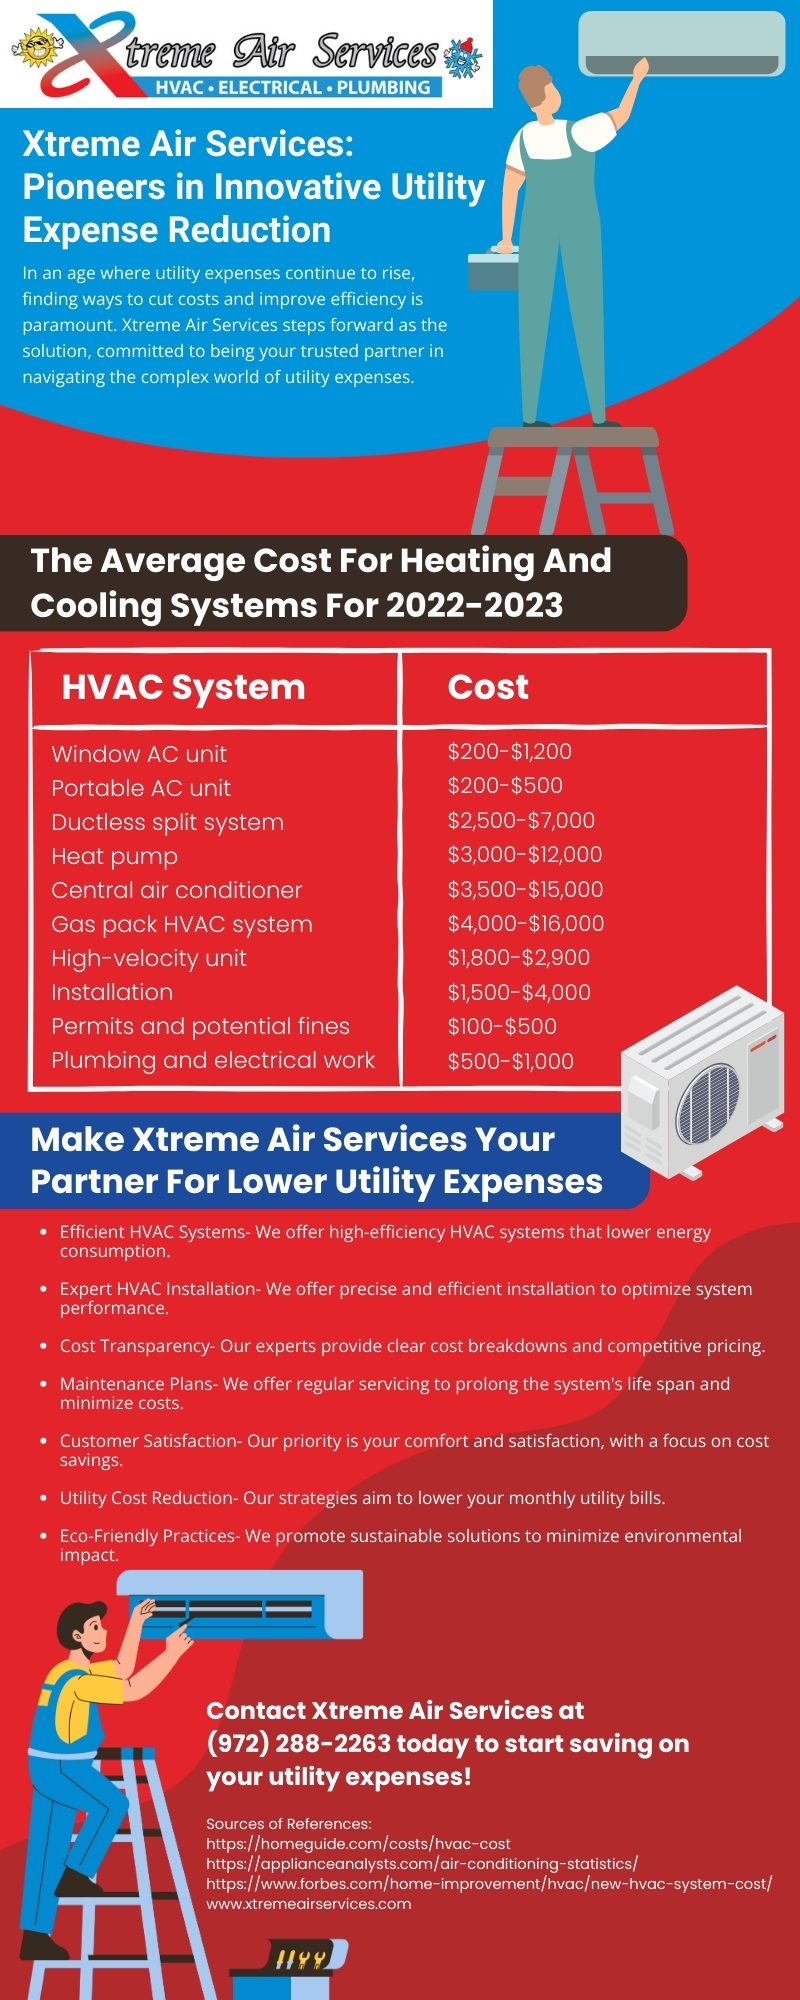 xtremeairservices Infographic 1